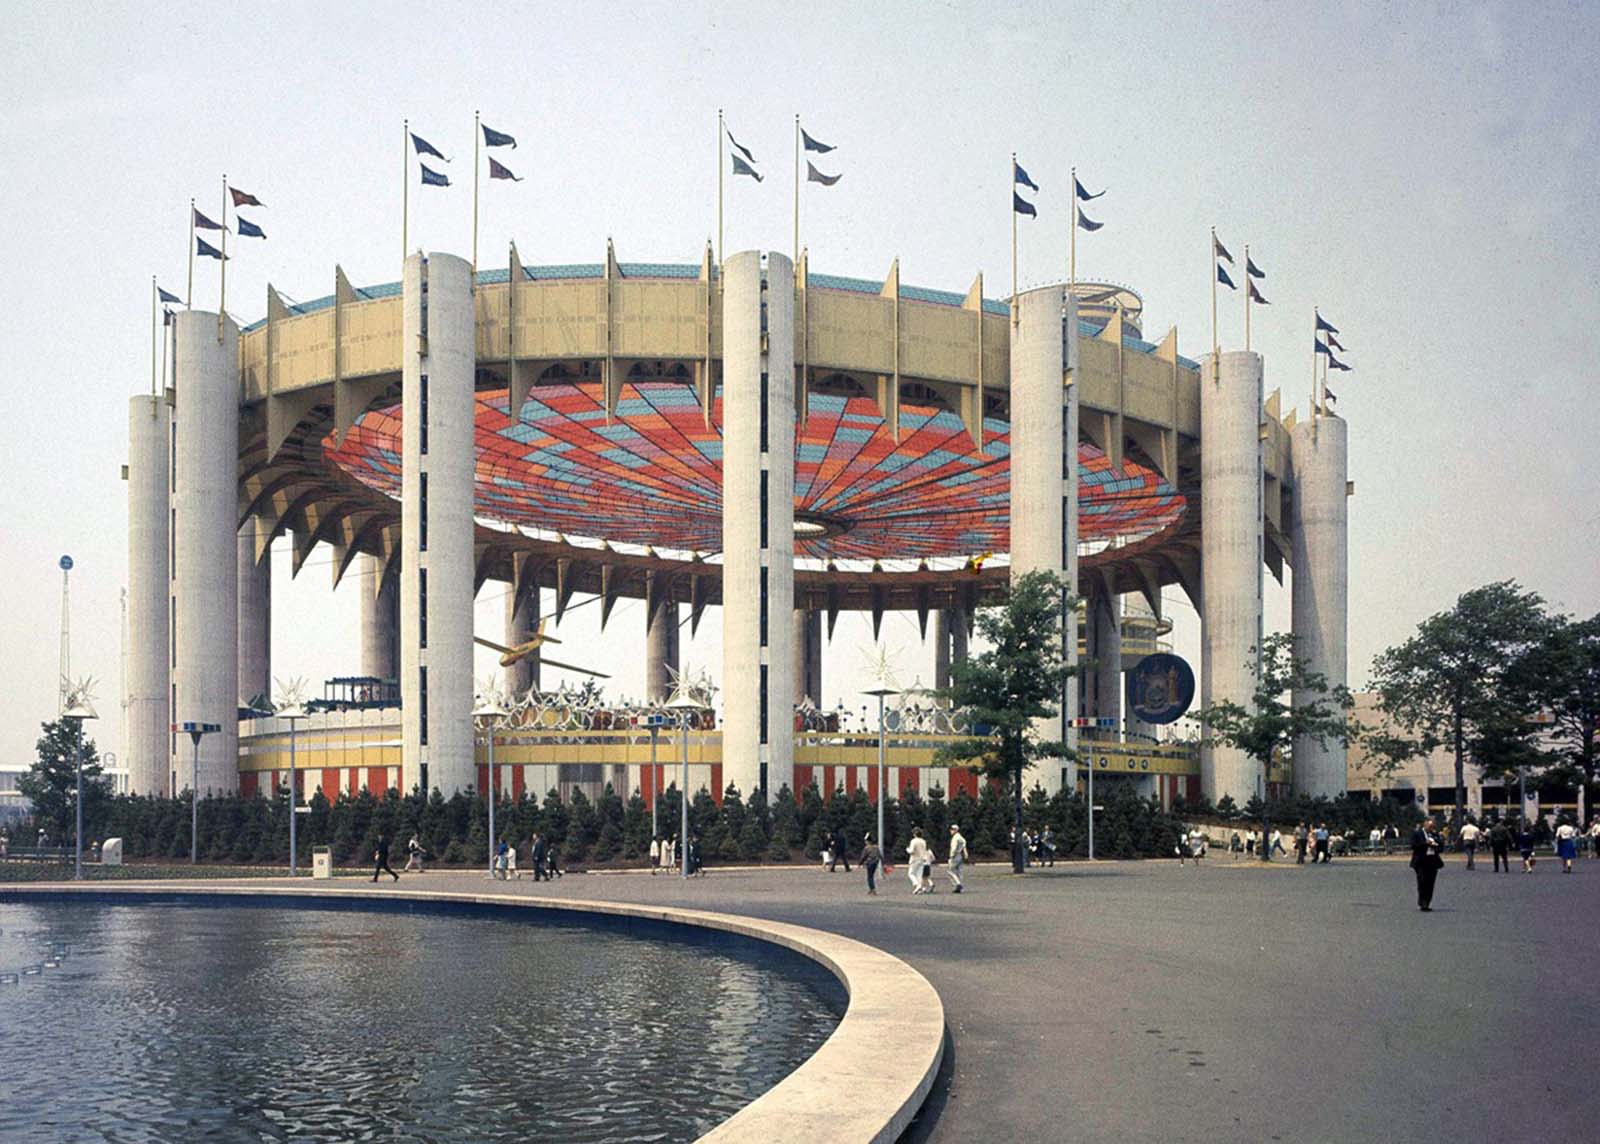 The New York State Pavilion at the New York World's Fair.